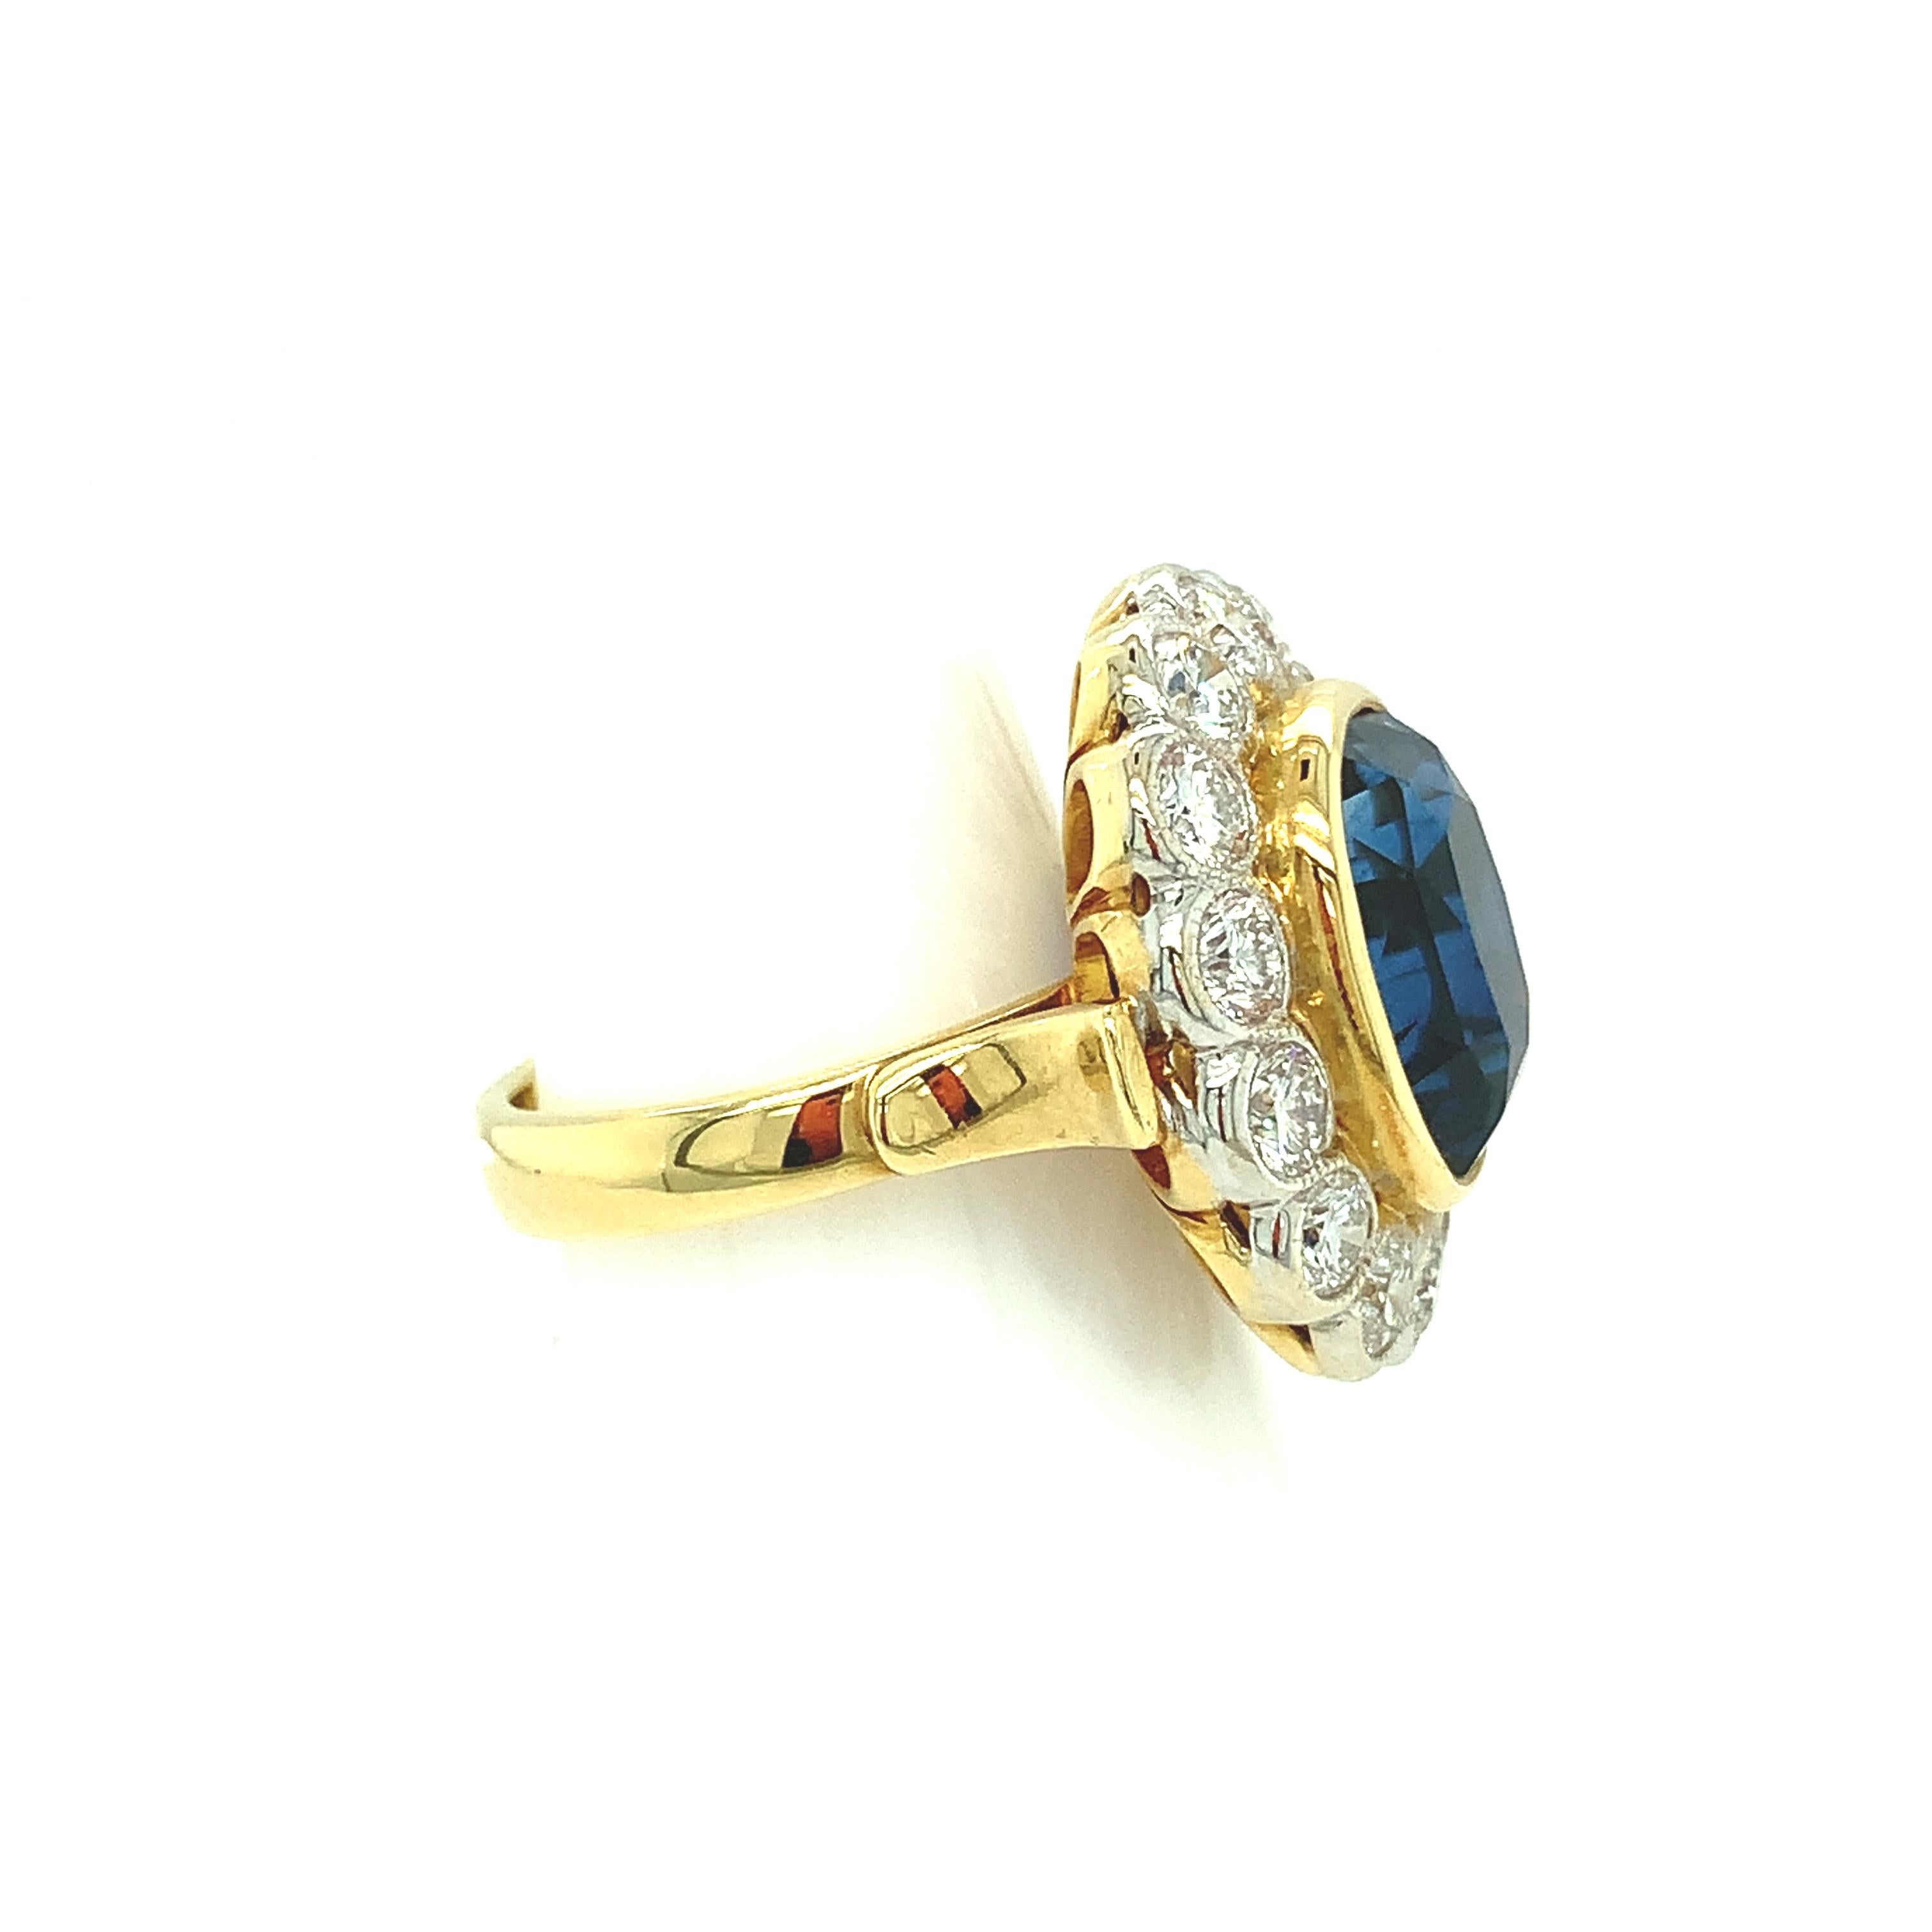 GIA Certified 10.16 Carat Ceylon Blue Sapphire and Diamond Cocktail Ring For Sale 2